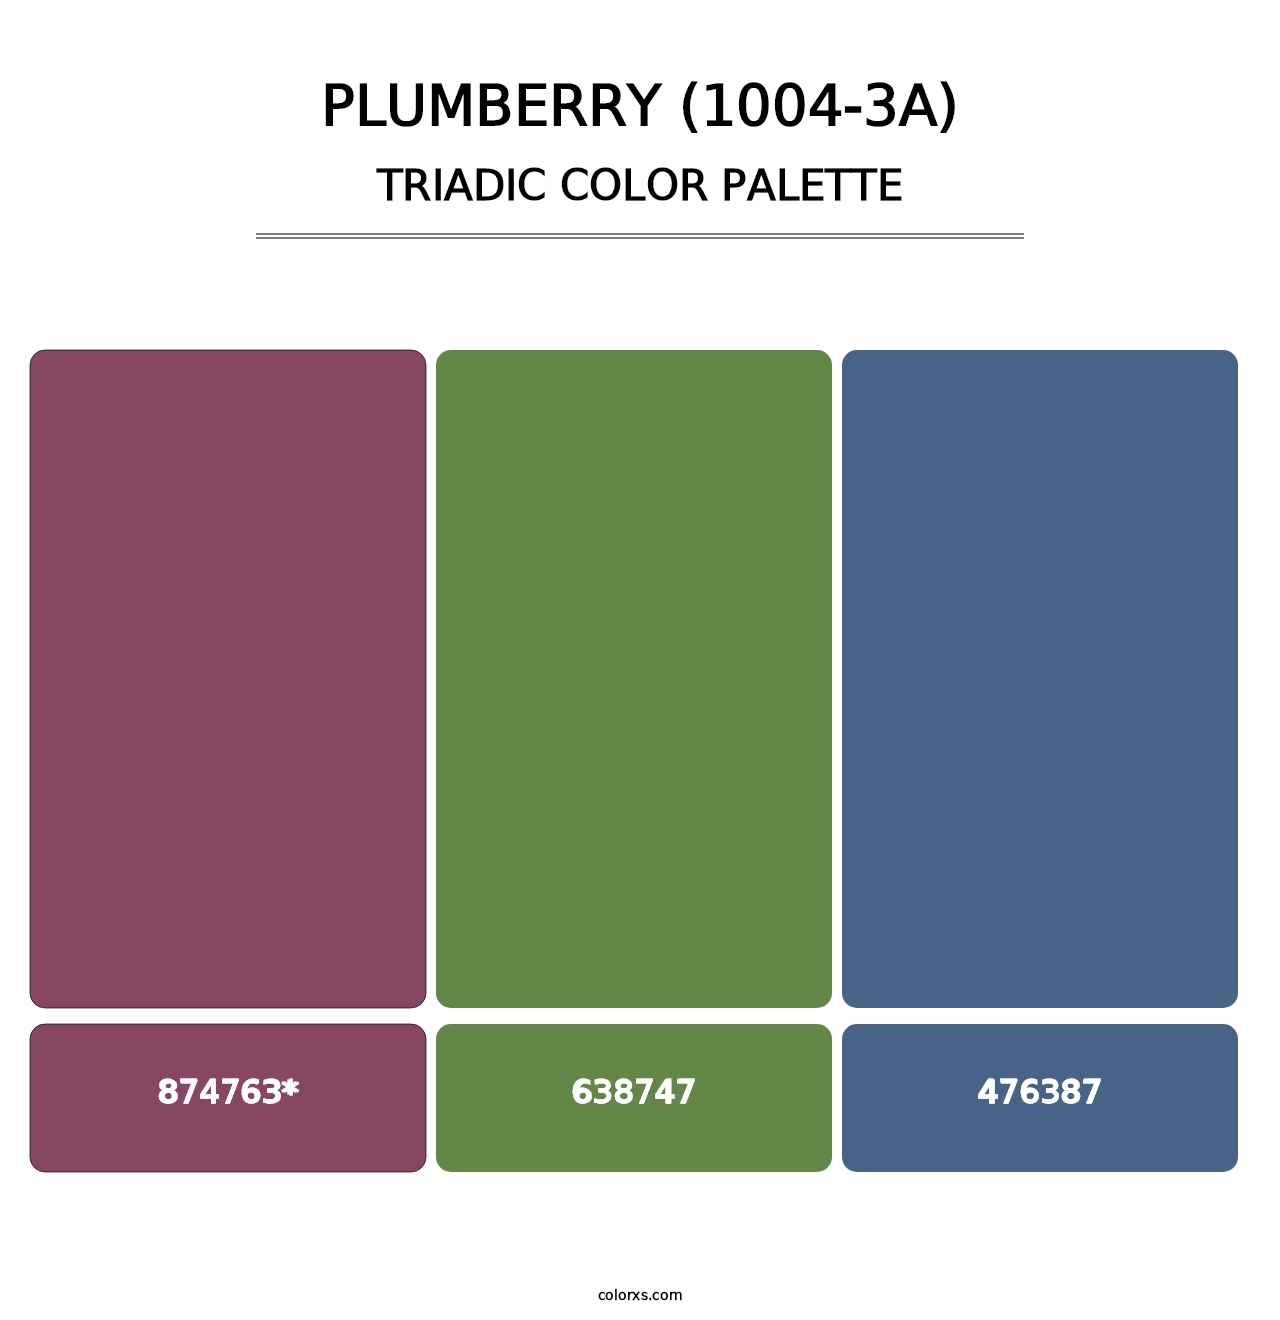 Plumberry (1004-3A) - Triadic Color Palette